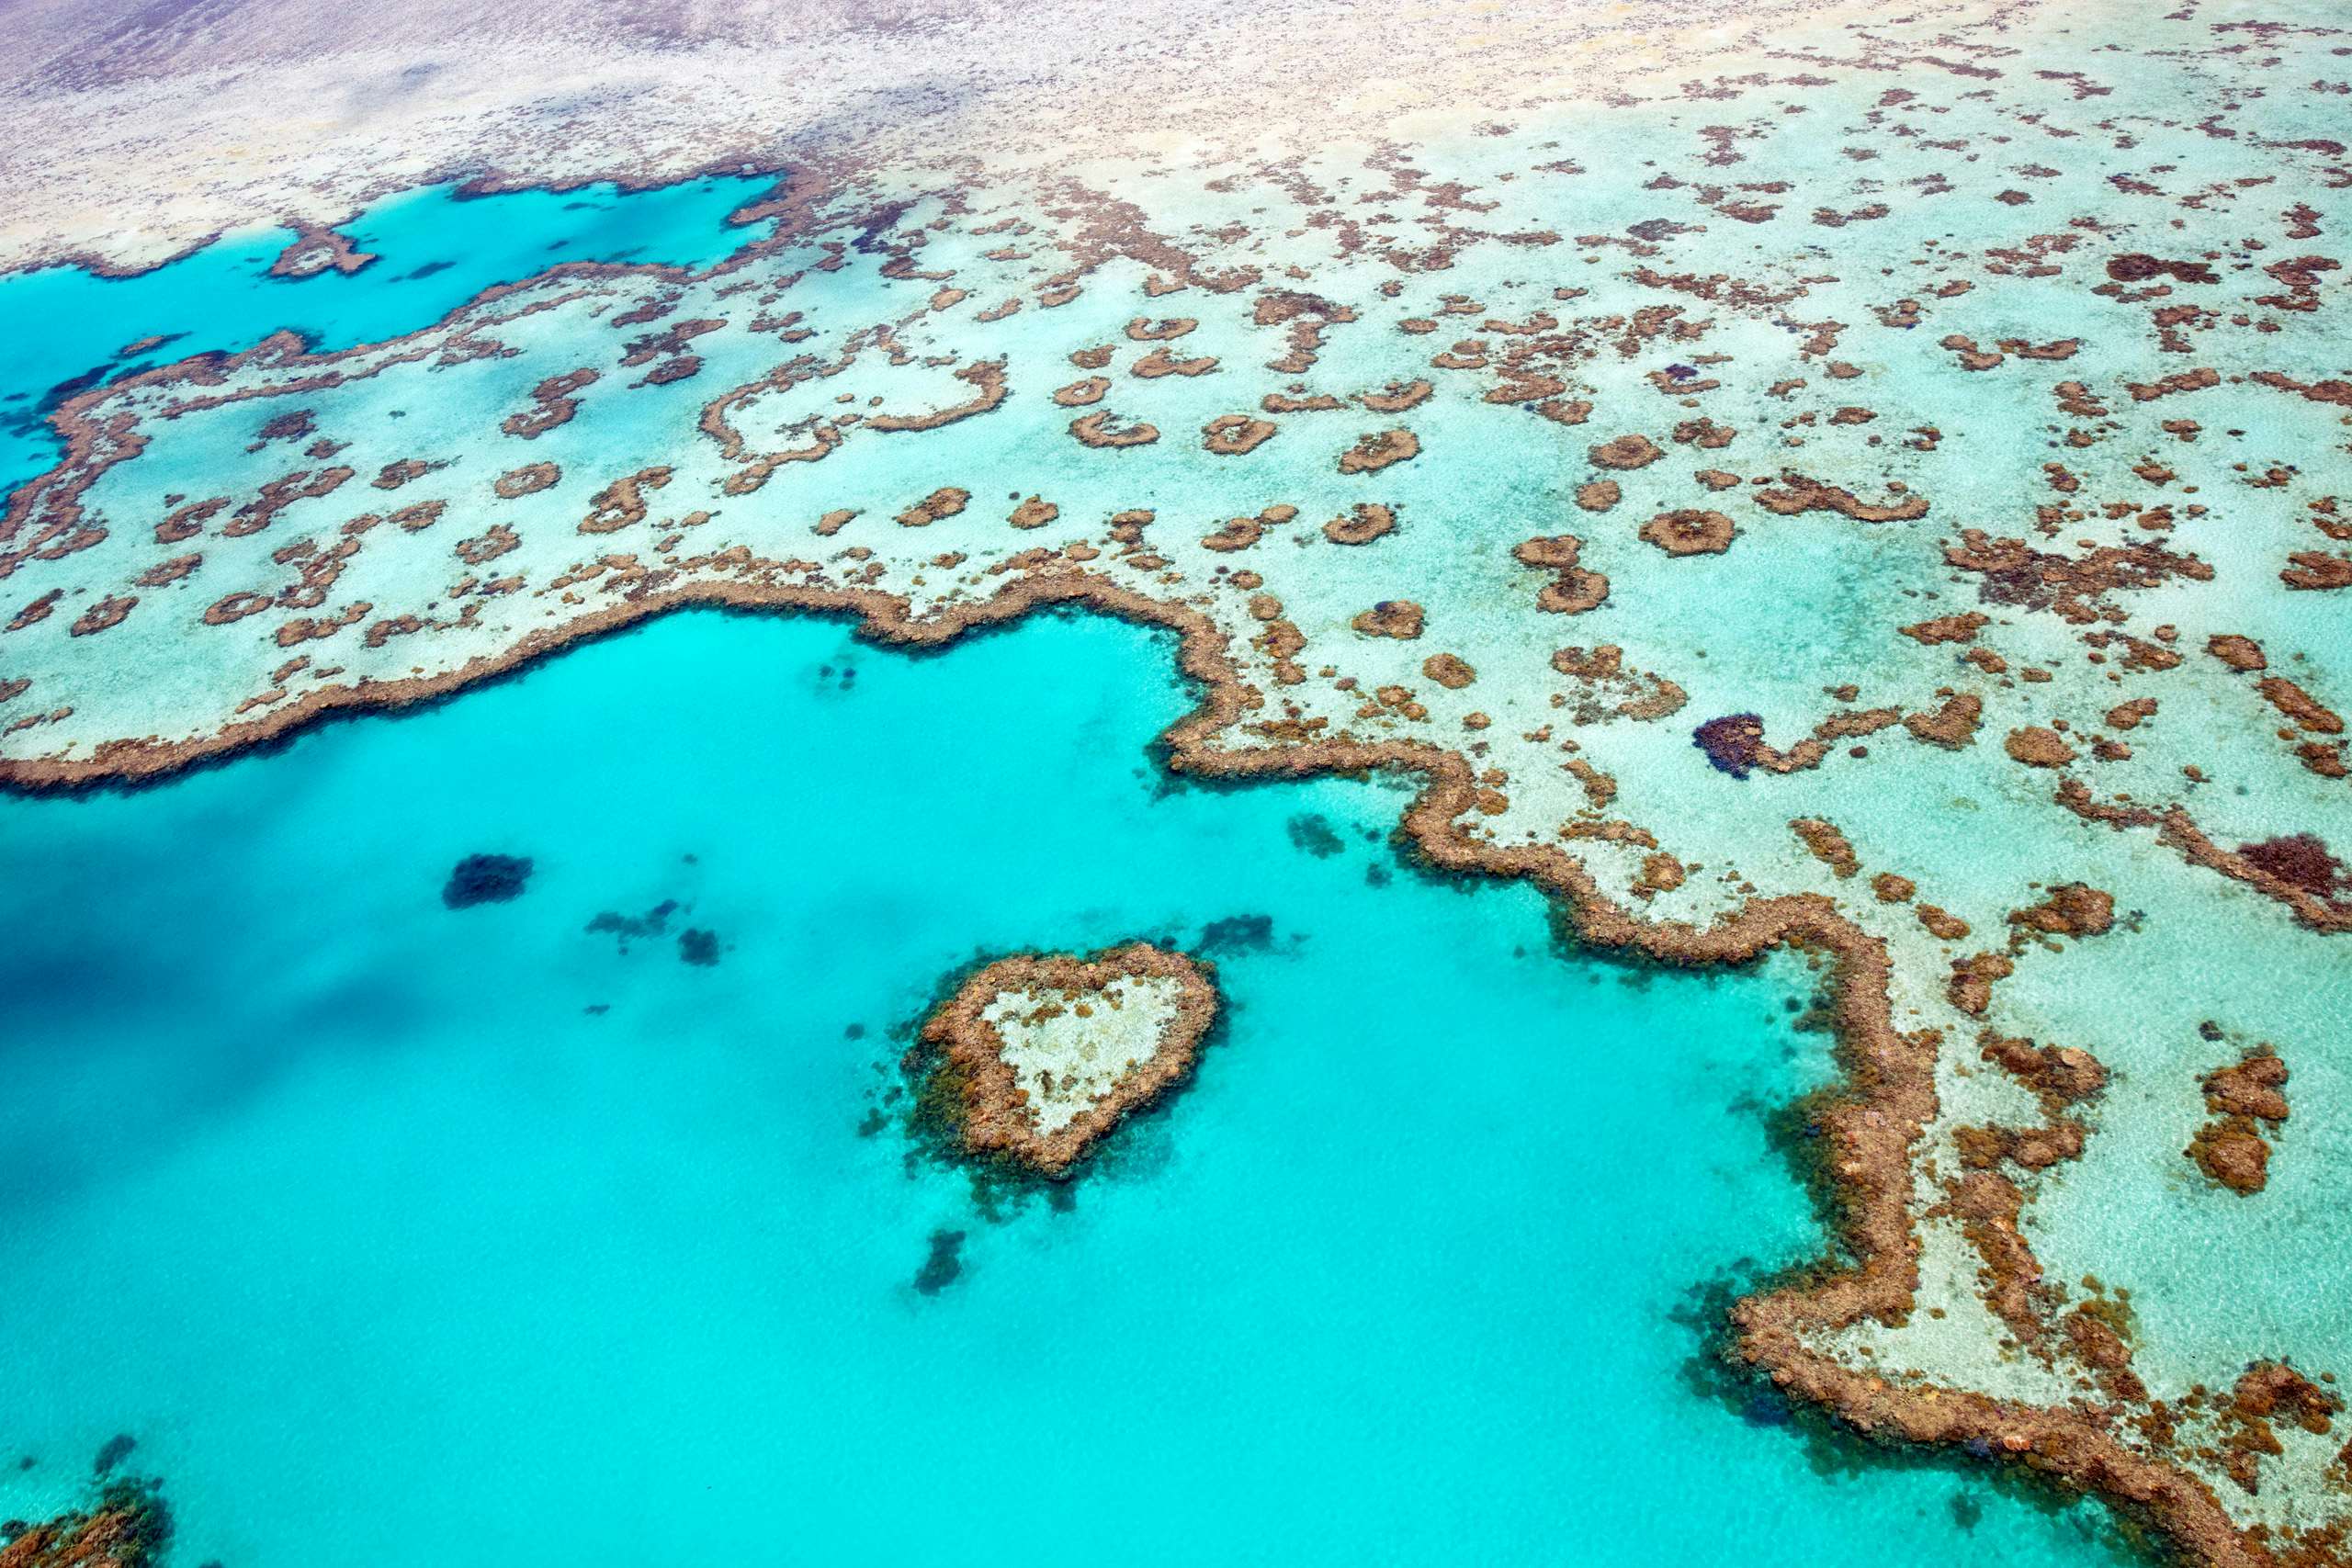 Australia Yacht Charter - Hert Reef, Australia bright blue water with coral reefs, priate and desolate destination